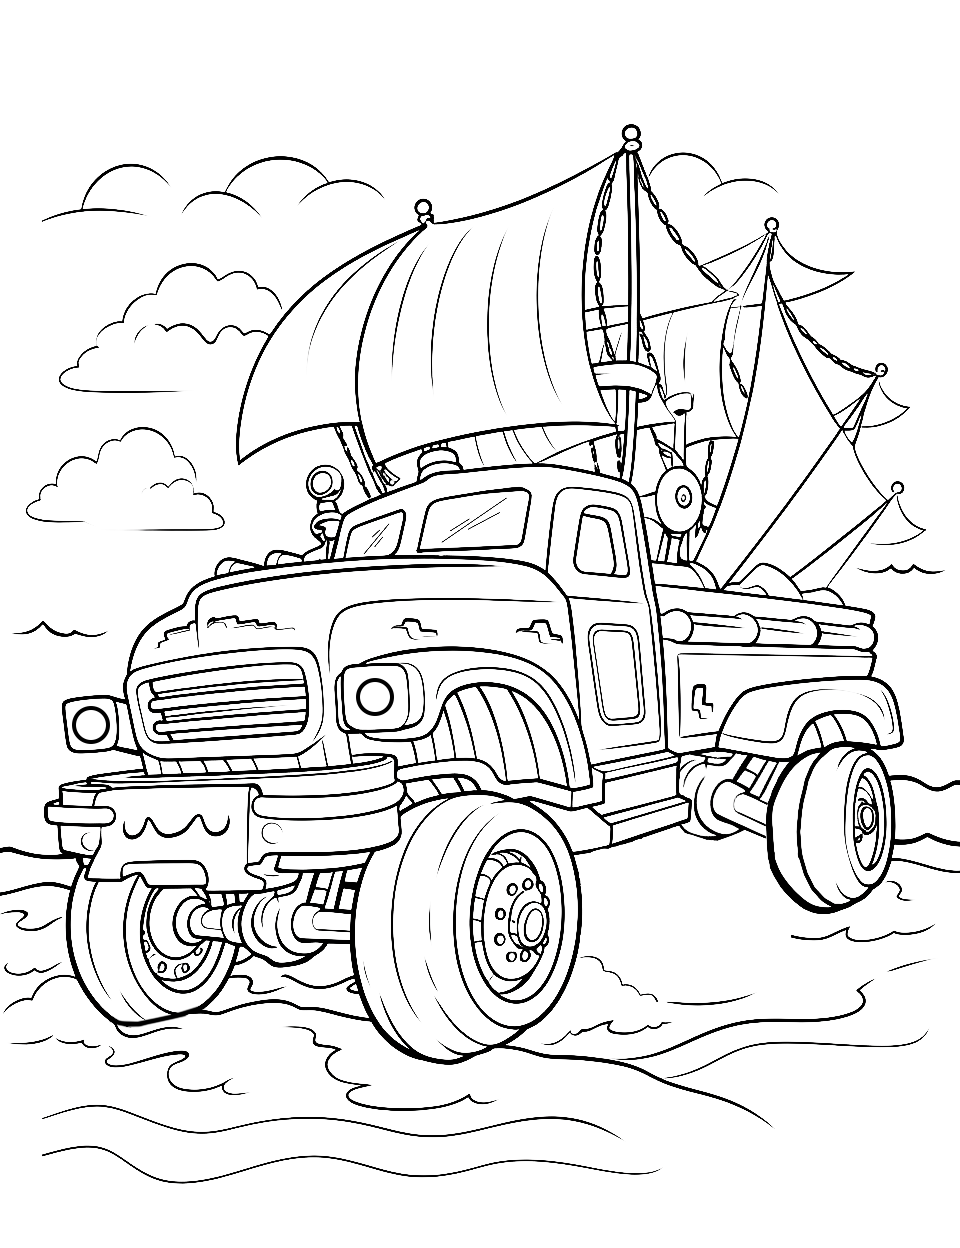 Pirate Plunder Pursuit Monster Truck Coloring Page - A pirate monster truck going for a treasure hunt.